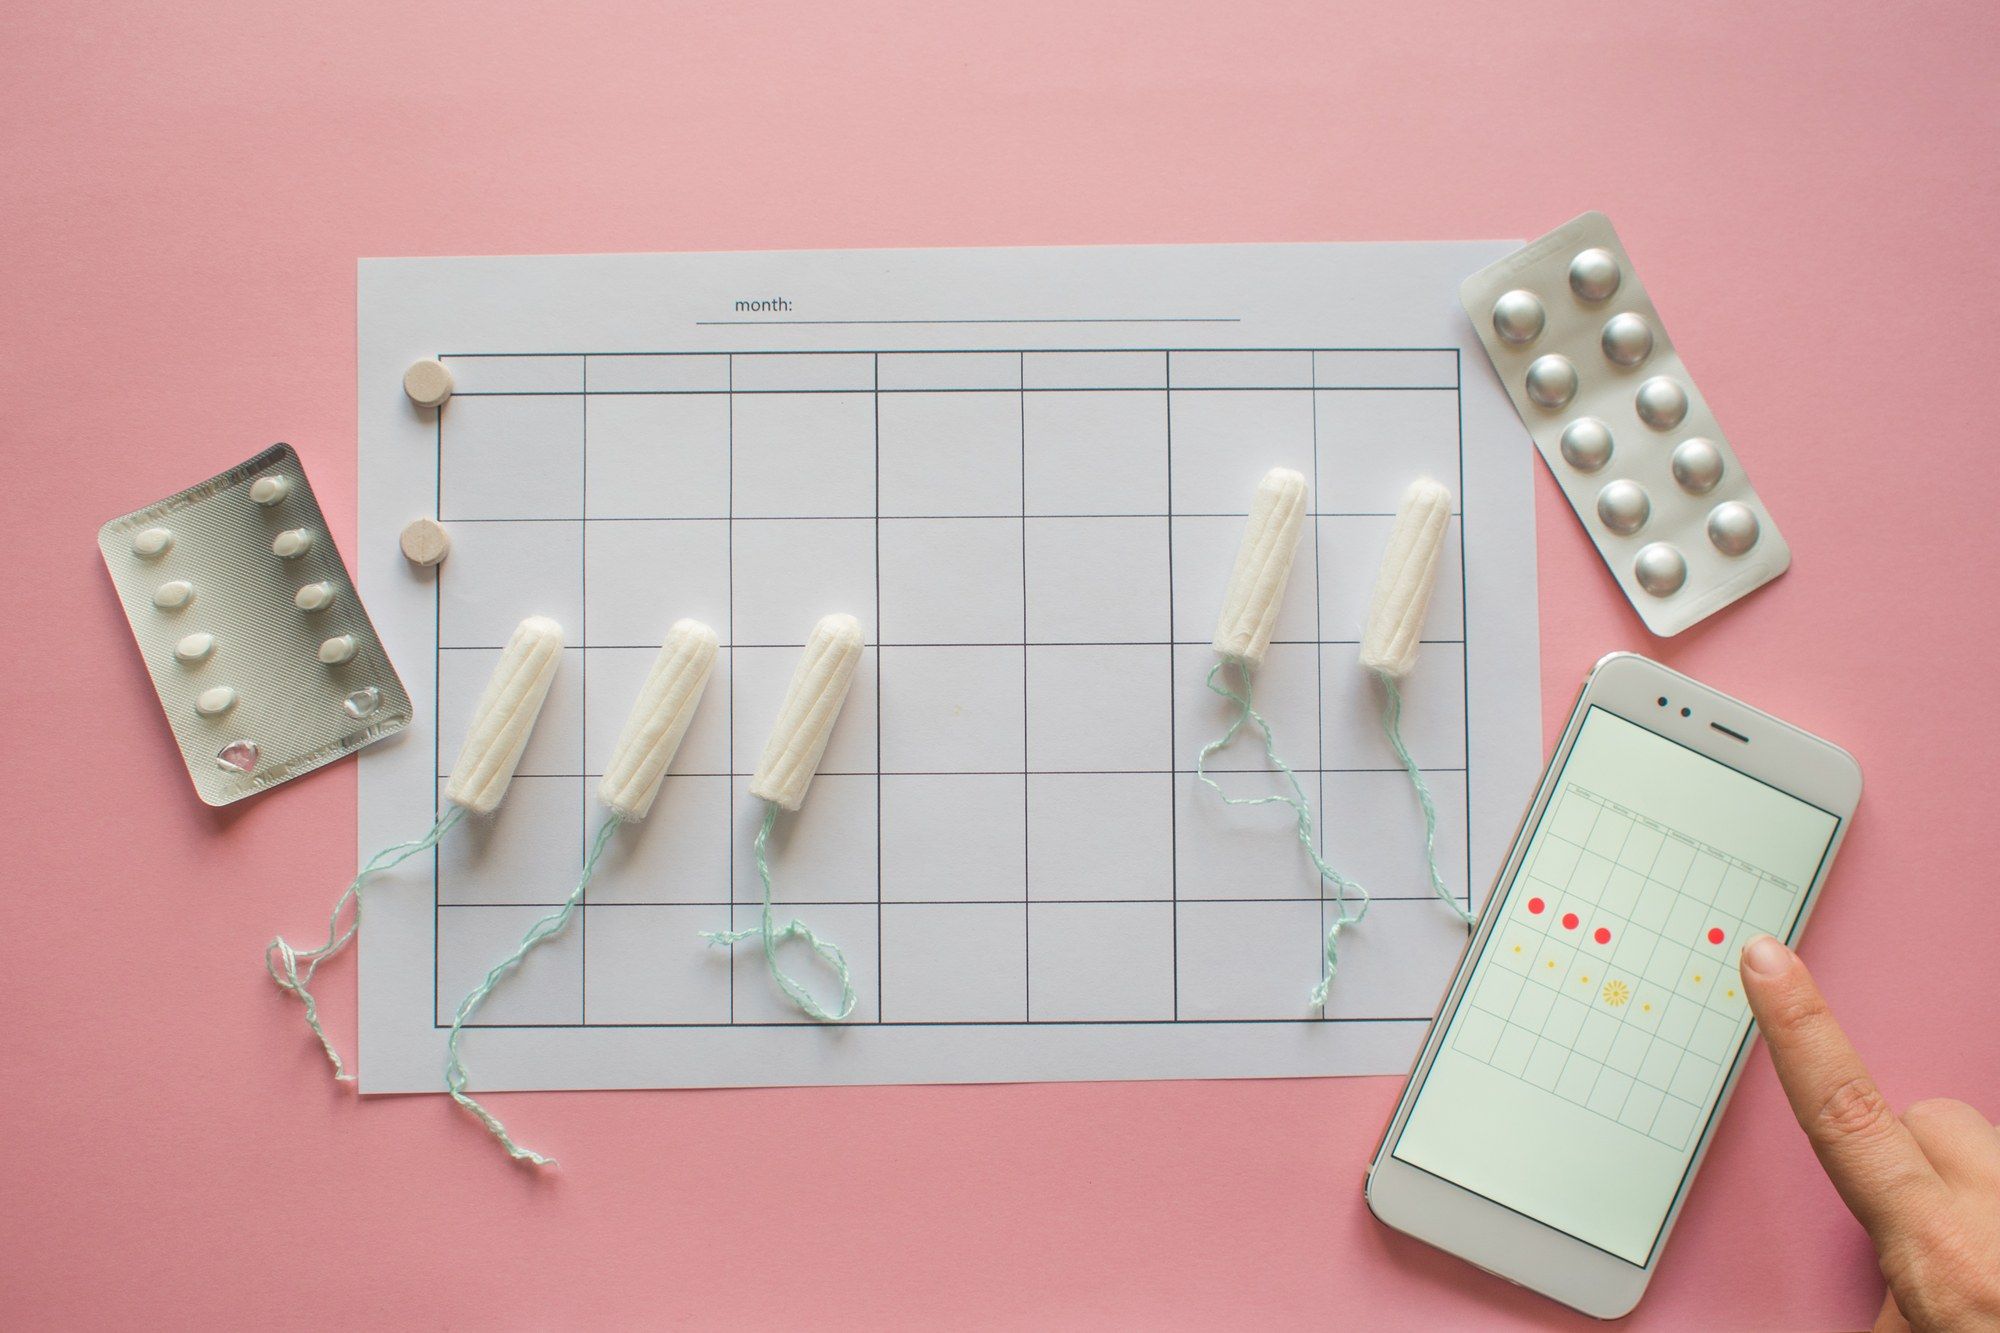 Period tracker app Flo accused of selling personal information